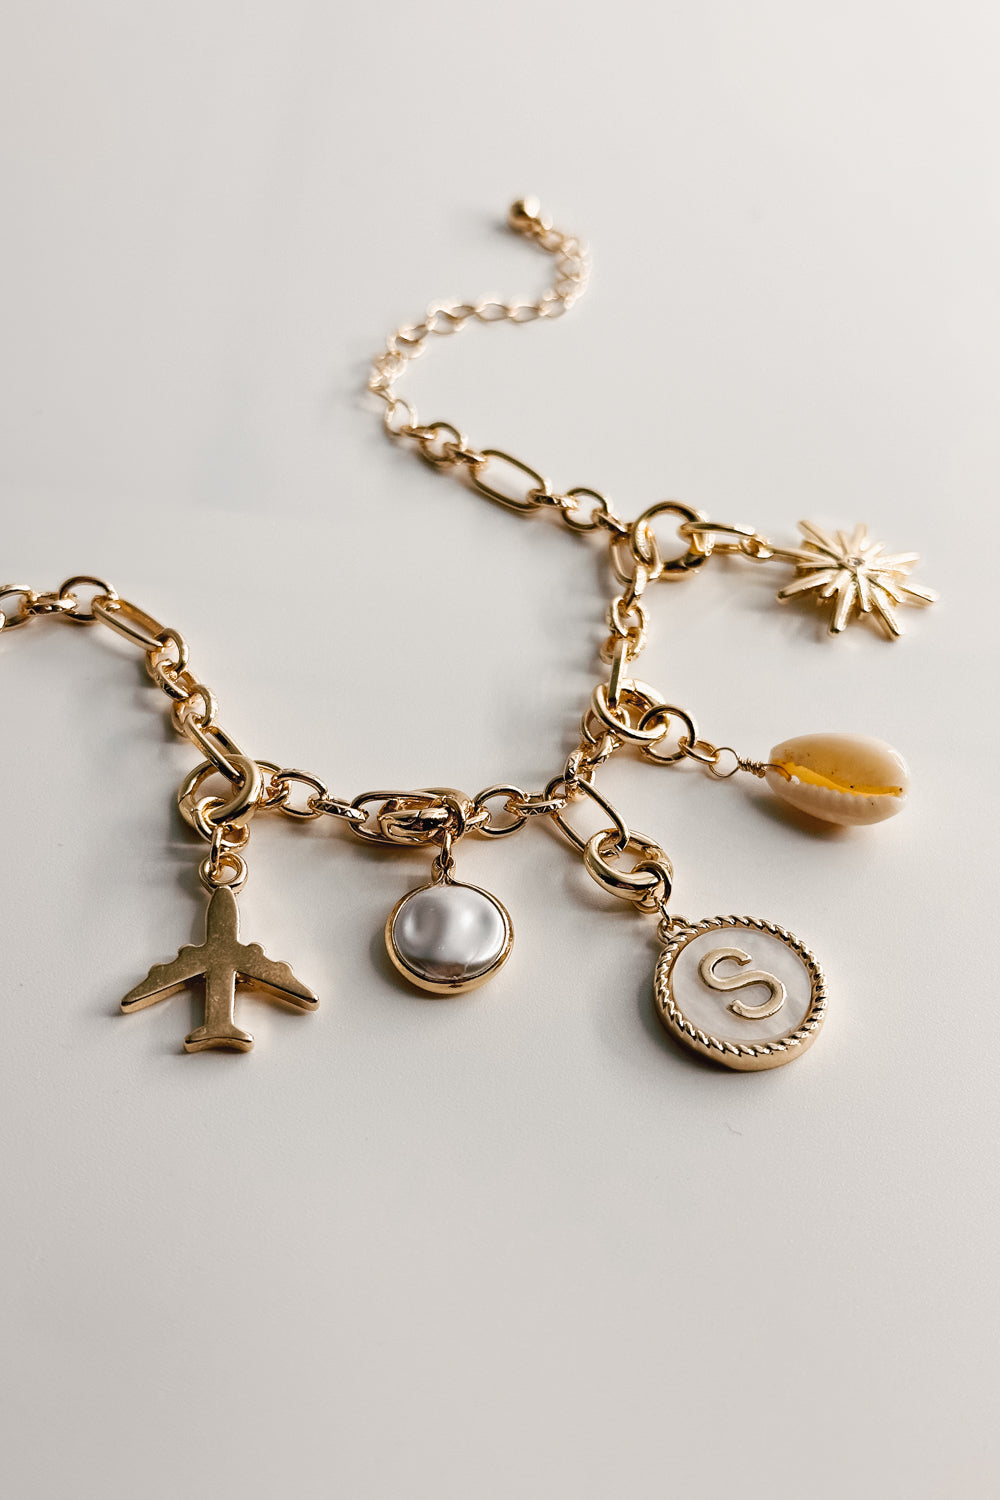 Image shows a gold chain link bracelet with assorted charms. 'S' alphabet charm is shown in the center.